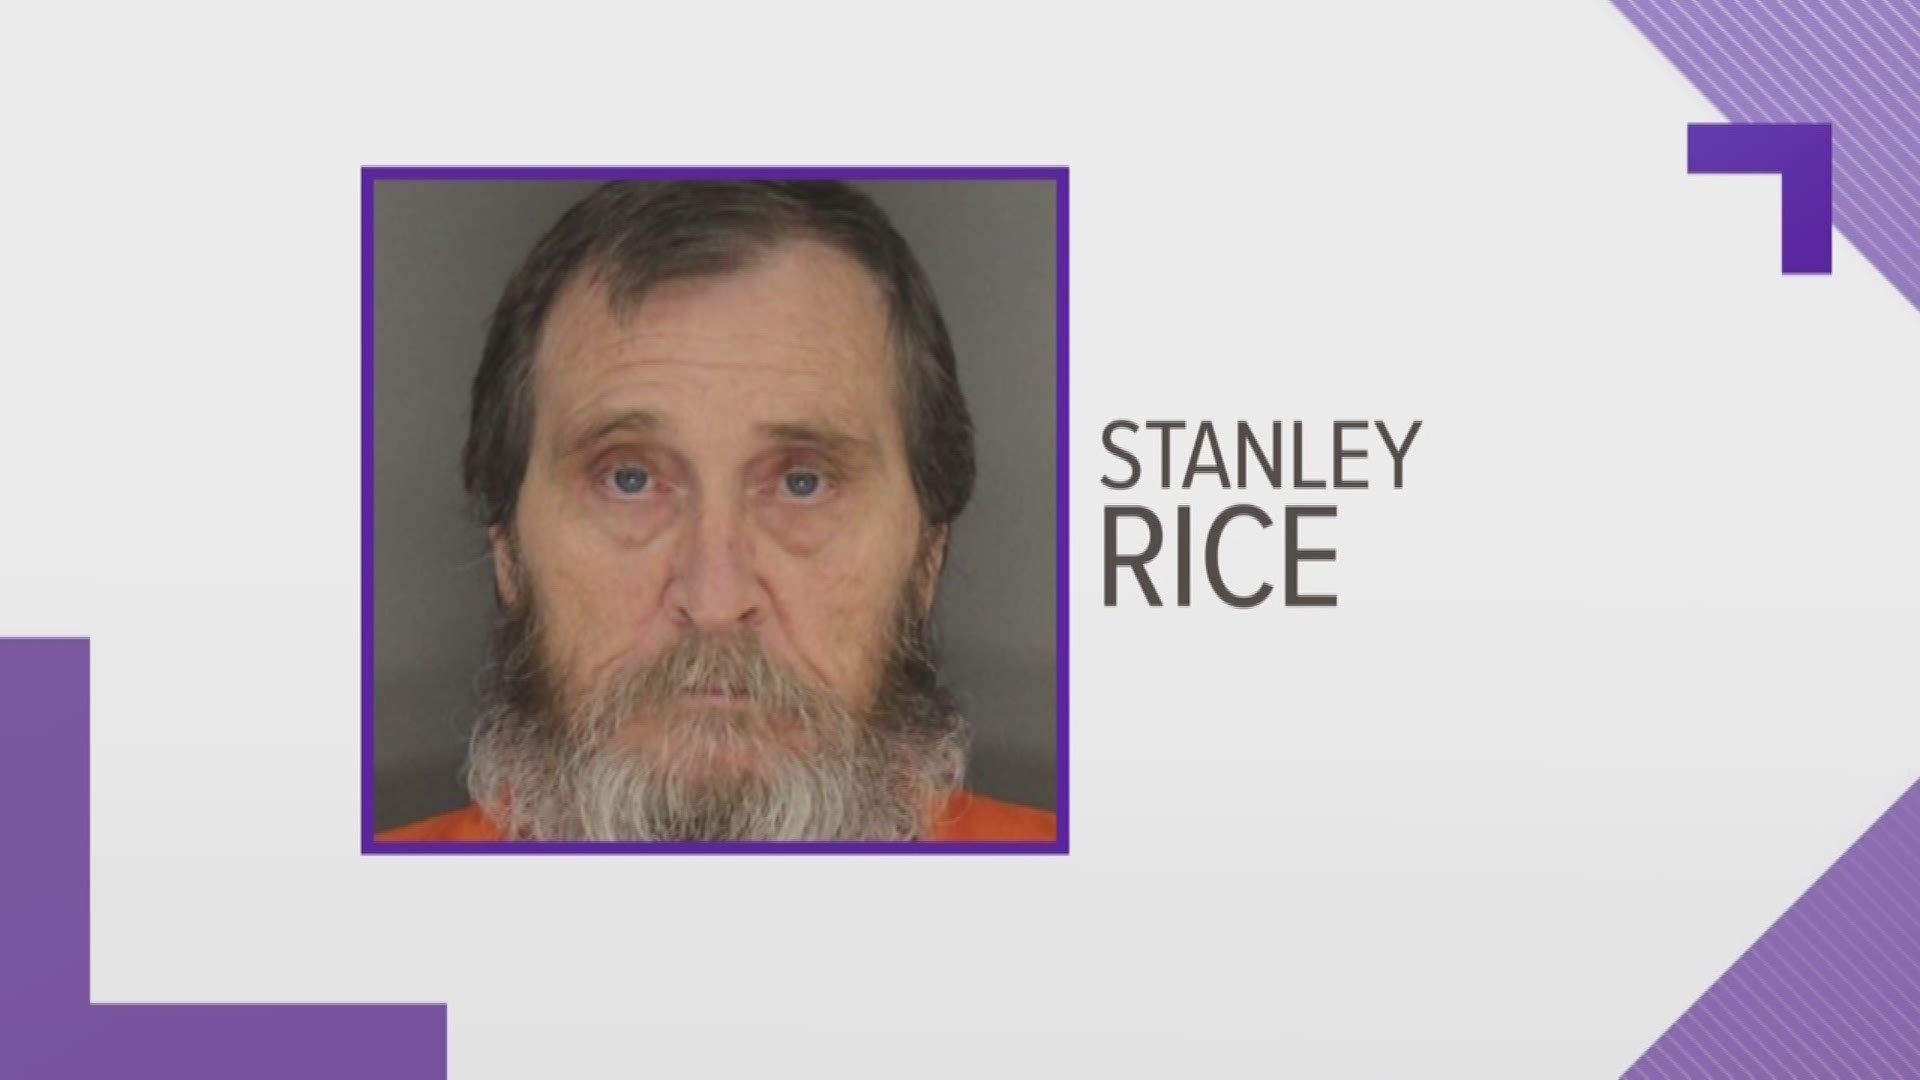 Van Buren man sentenced to life in federal prison for sexual abuse of two minors thv11 image